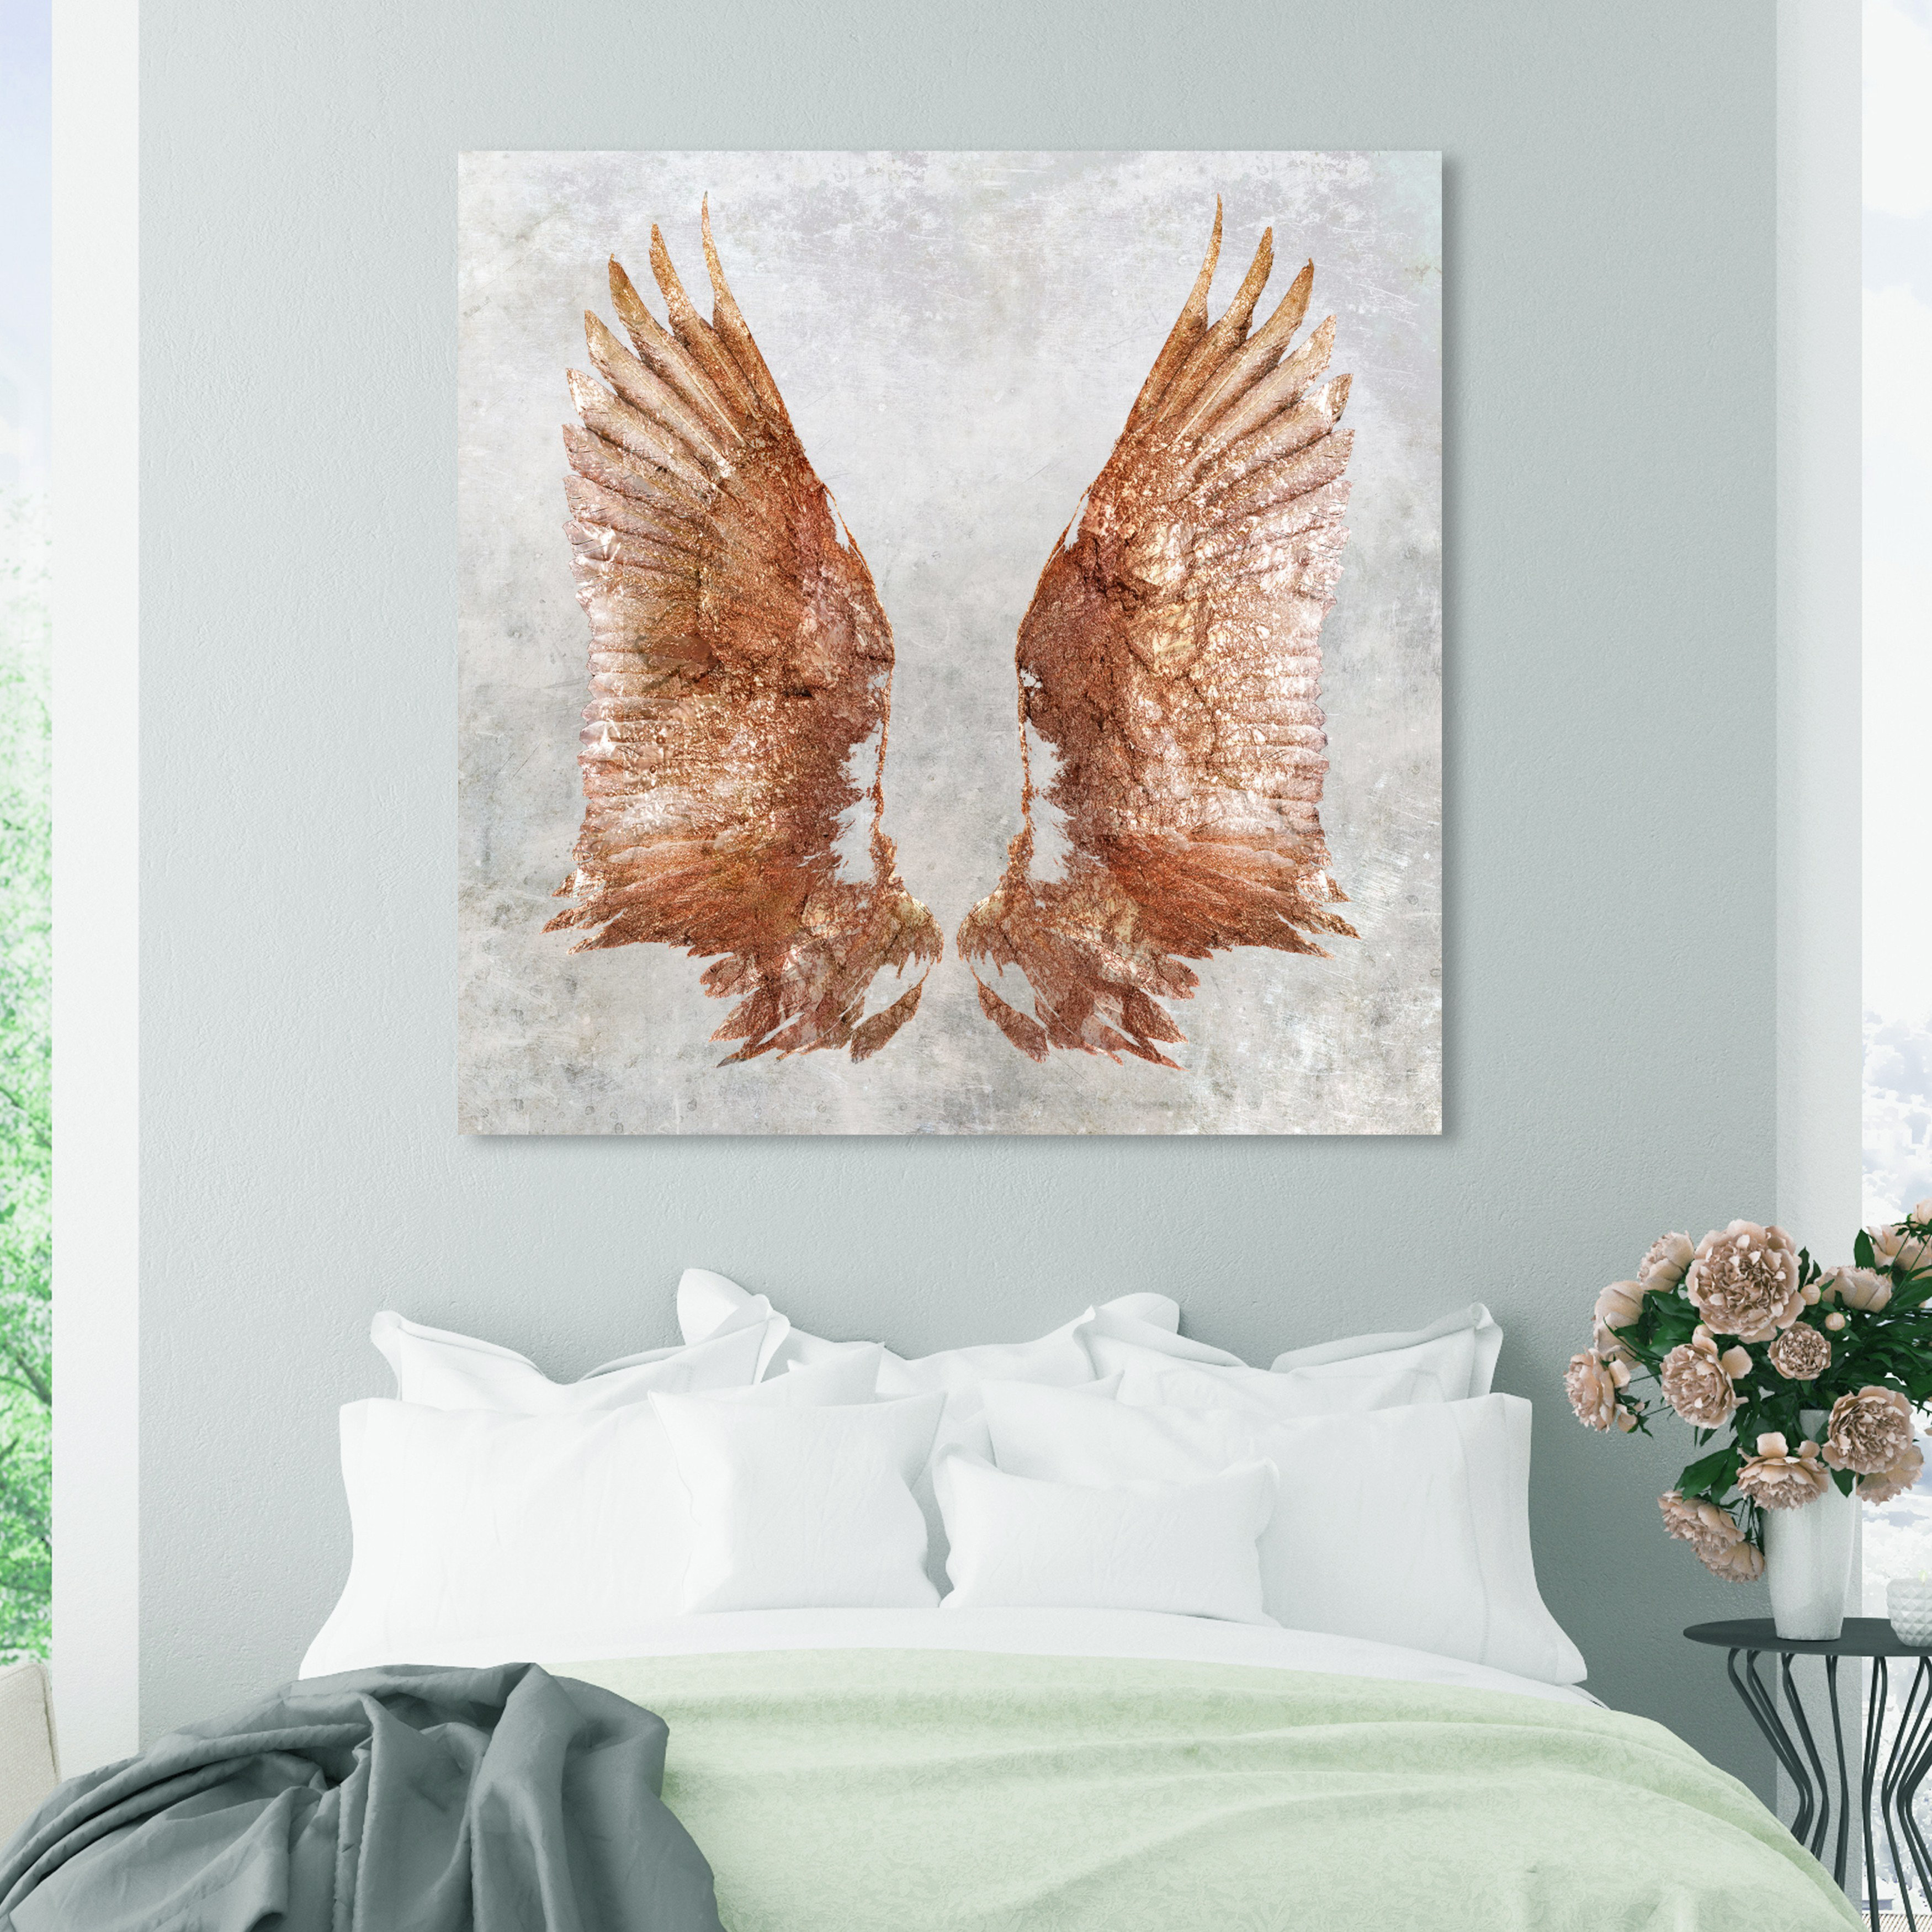 Rose Gold Wings' Graphic Art Print on Wrapped Canvas House of Hampton Format: White Framed, Size: 12 H x 12 W x 1.5 D